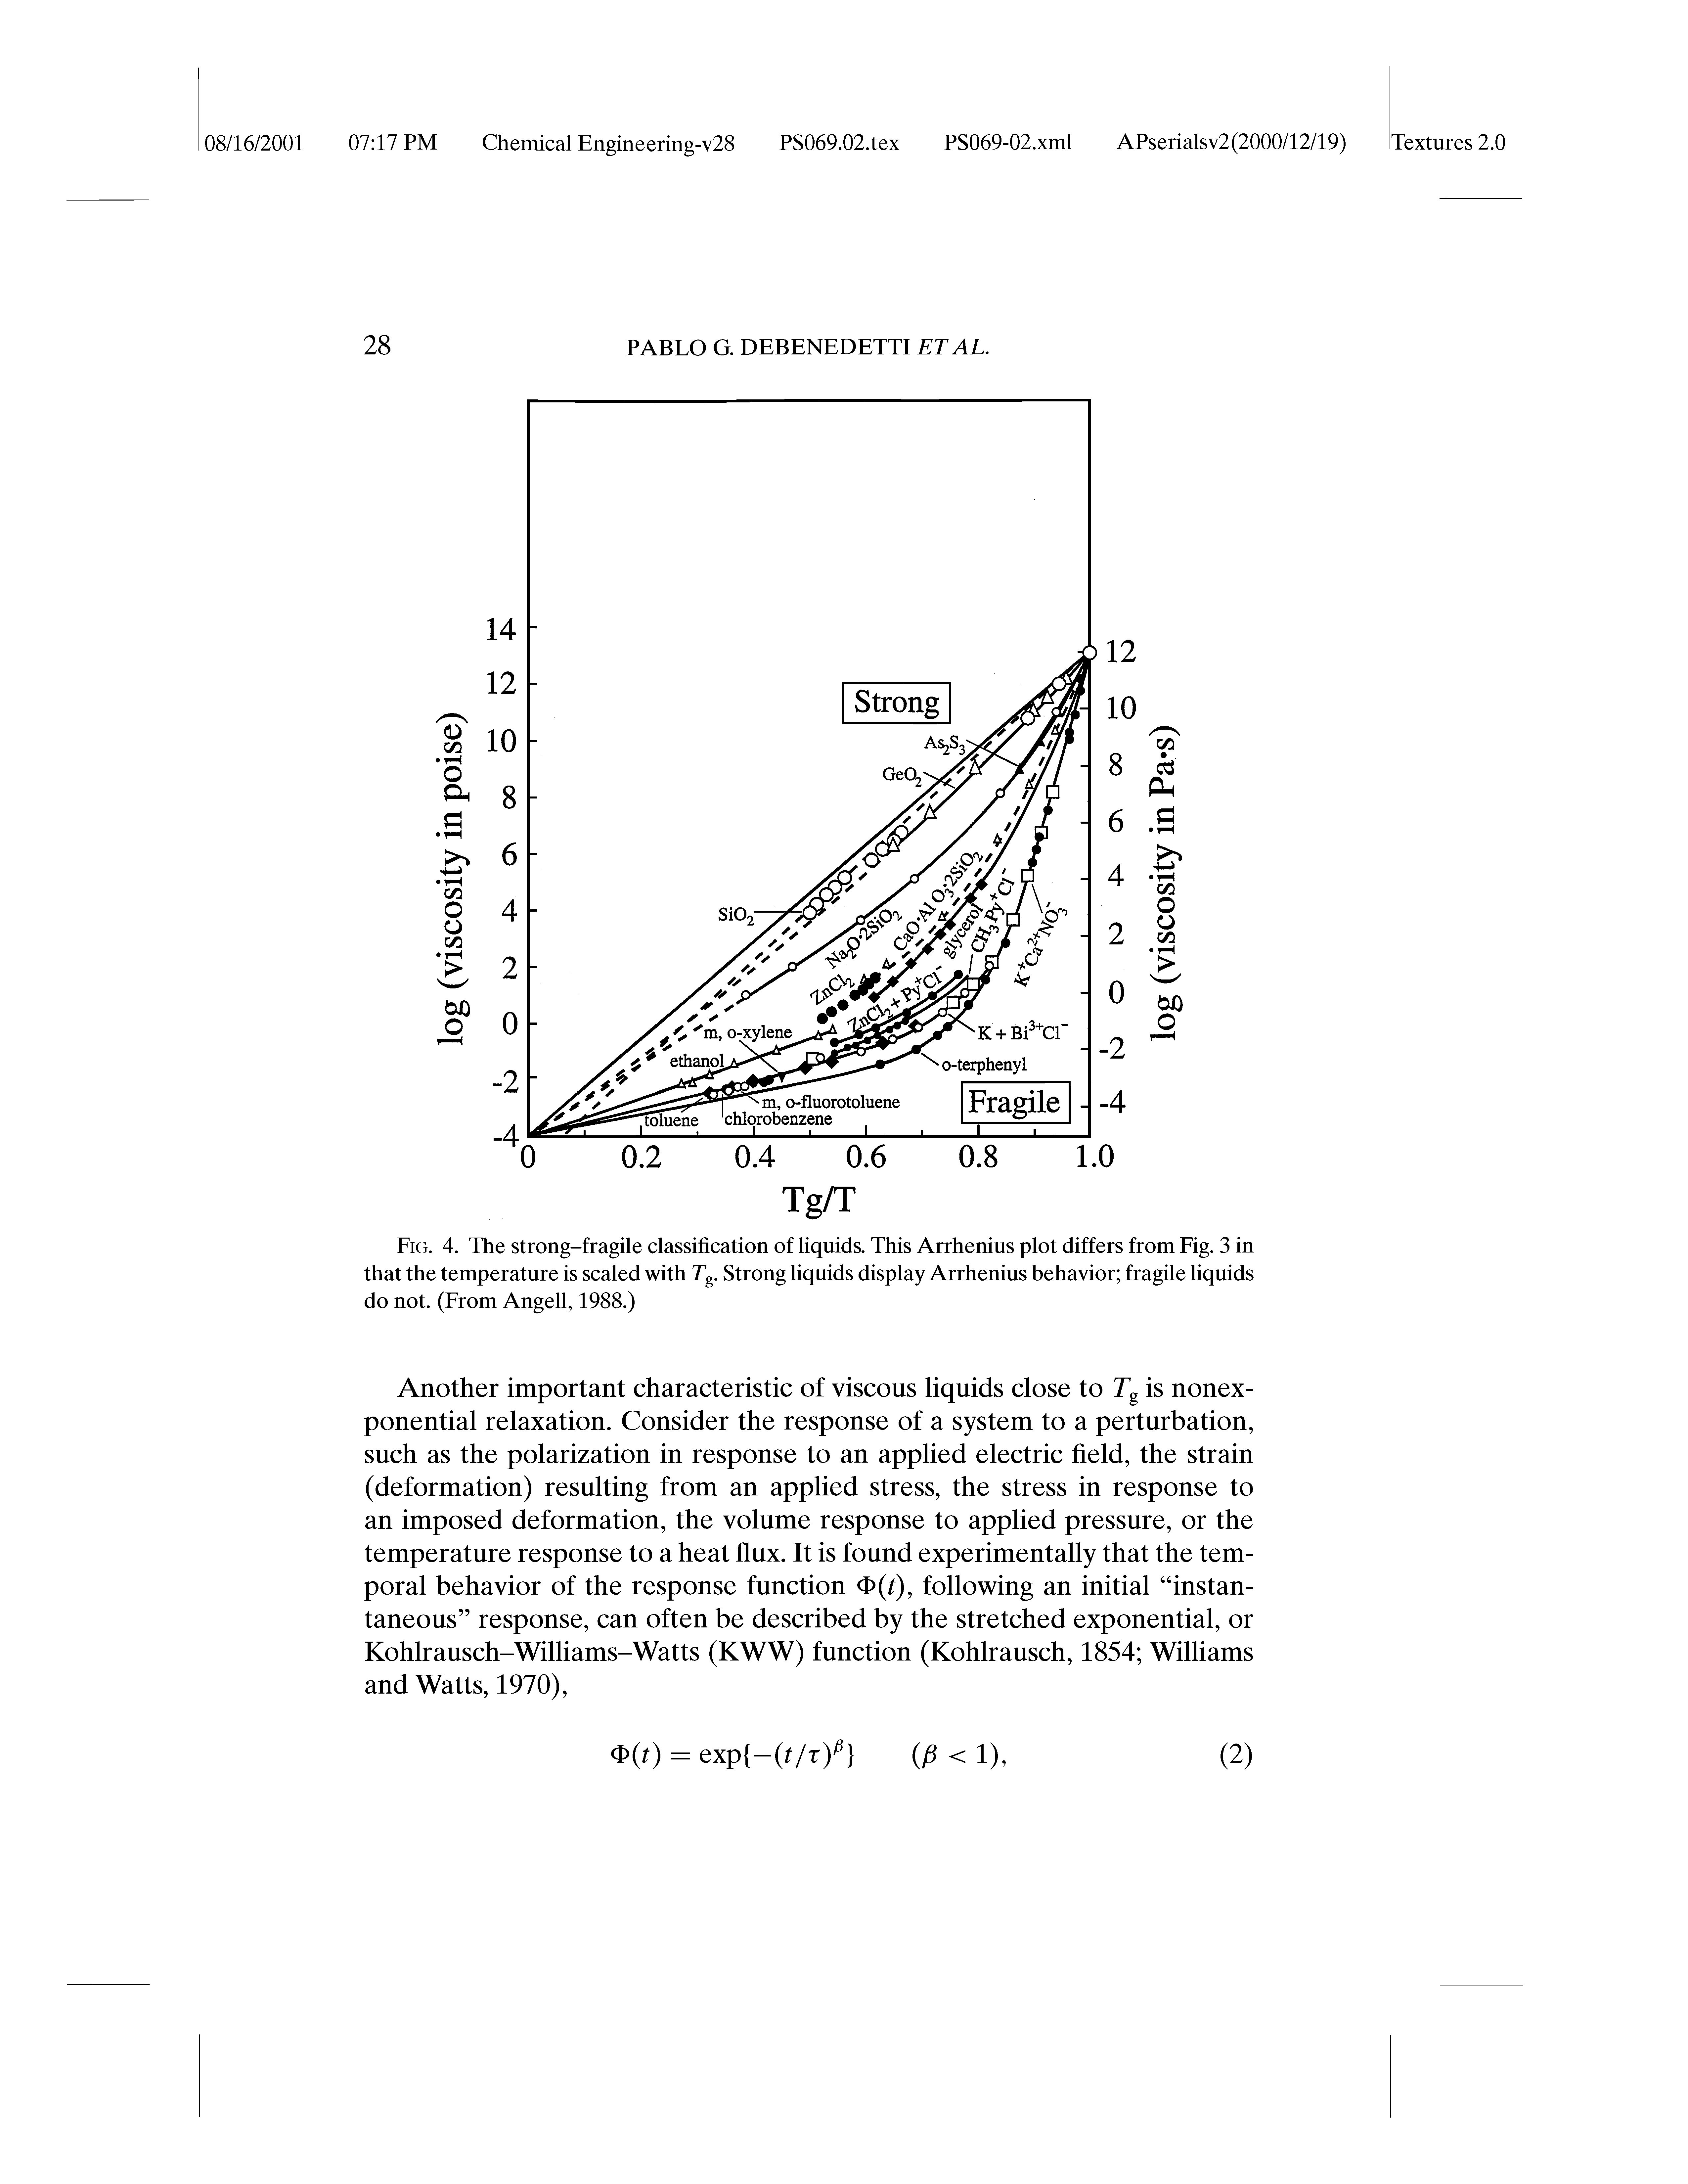 Fig. 4. The strong-fragile classification of liquids. This Arrhenius plot differs from Fig. 3 in that the temperature is scaled with Eg. Strong liquids display Arrhenius behavior fragile liquids do not. (From Angell, 1988.)...